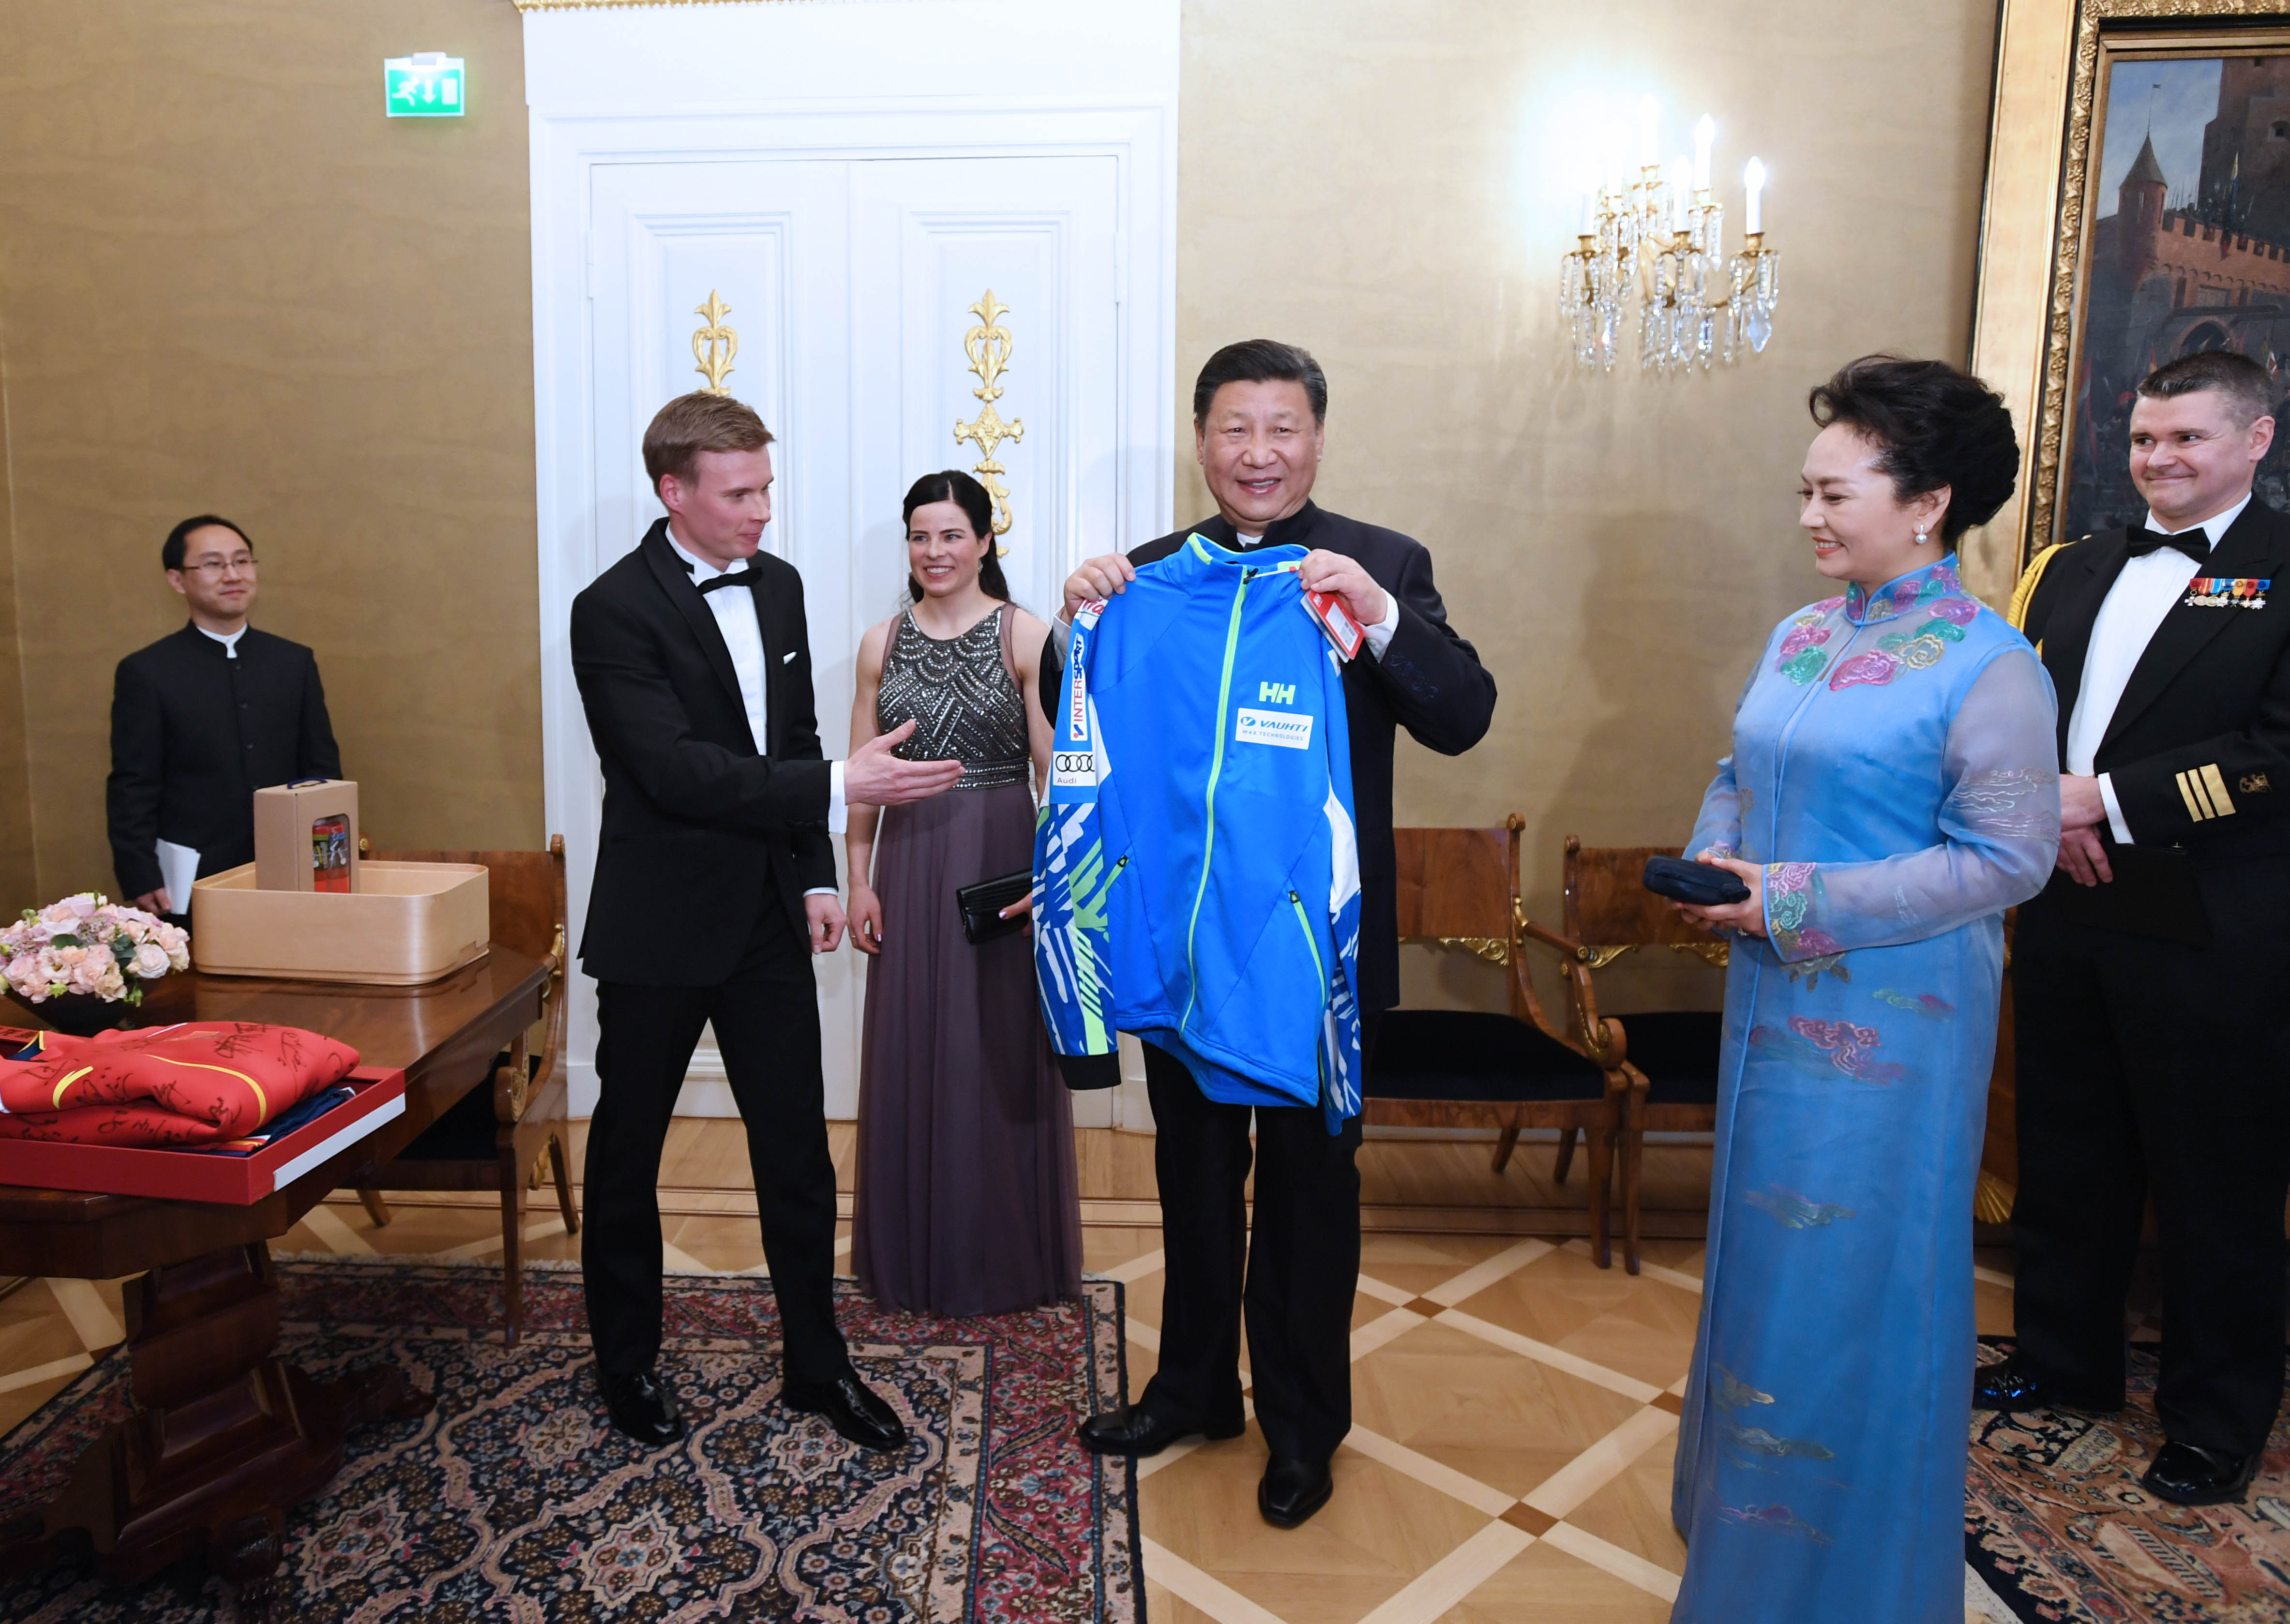 President Xi receives the signed sportswear. [Photo: Xinhua]